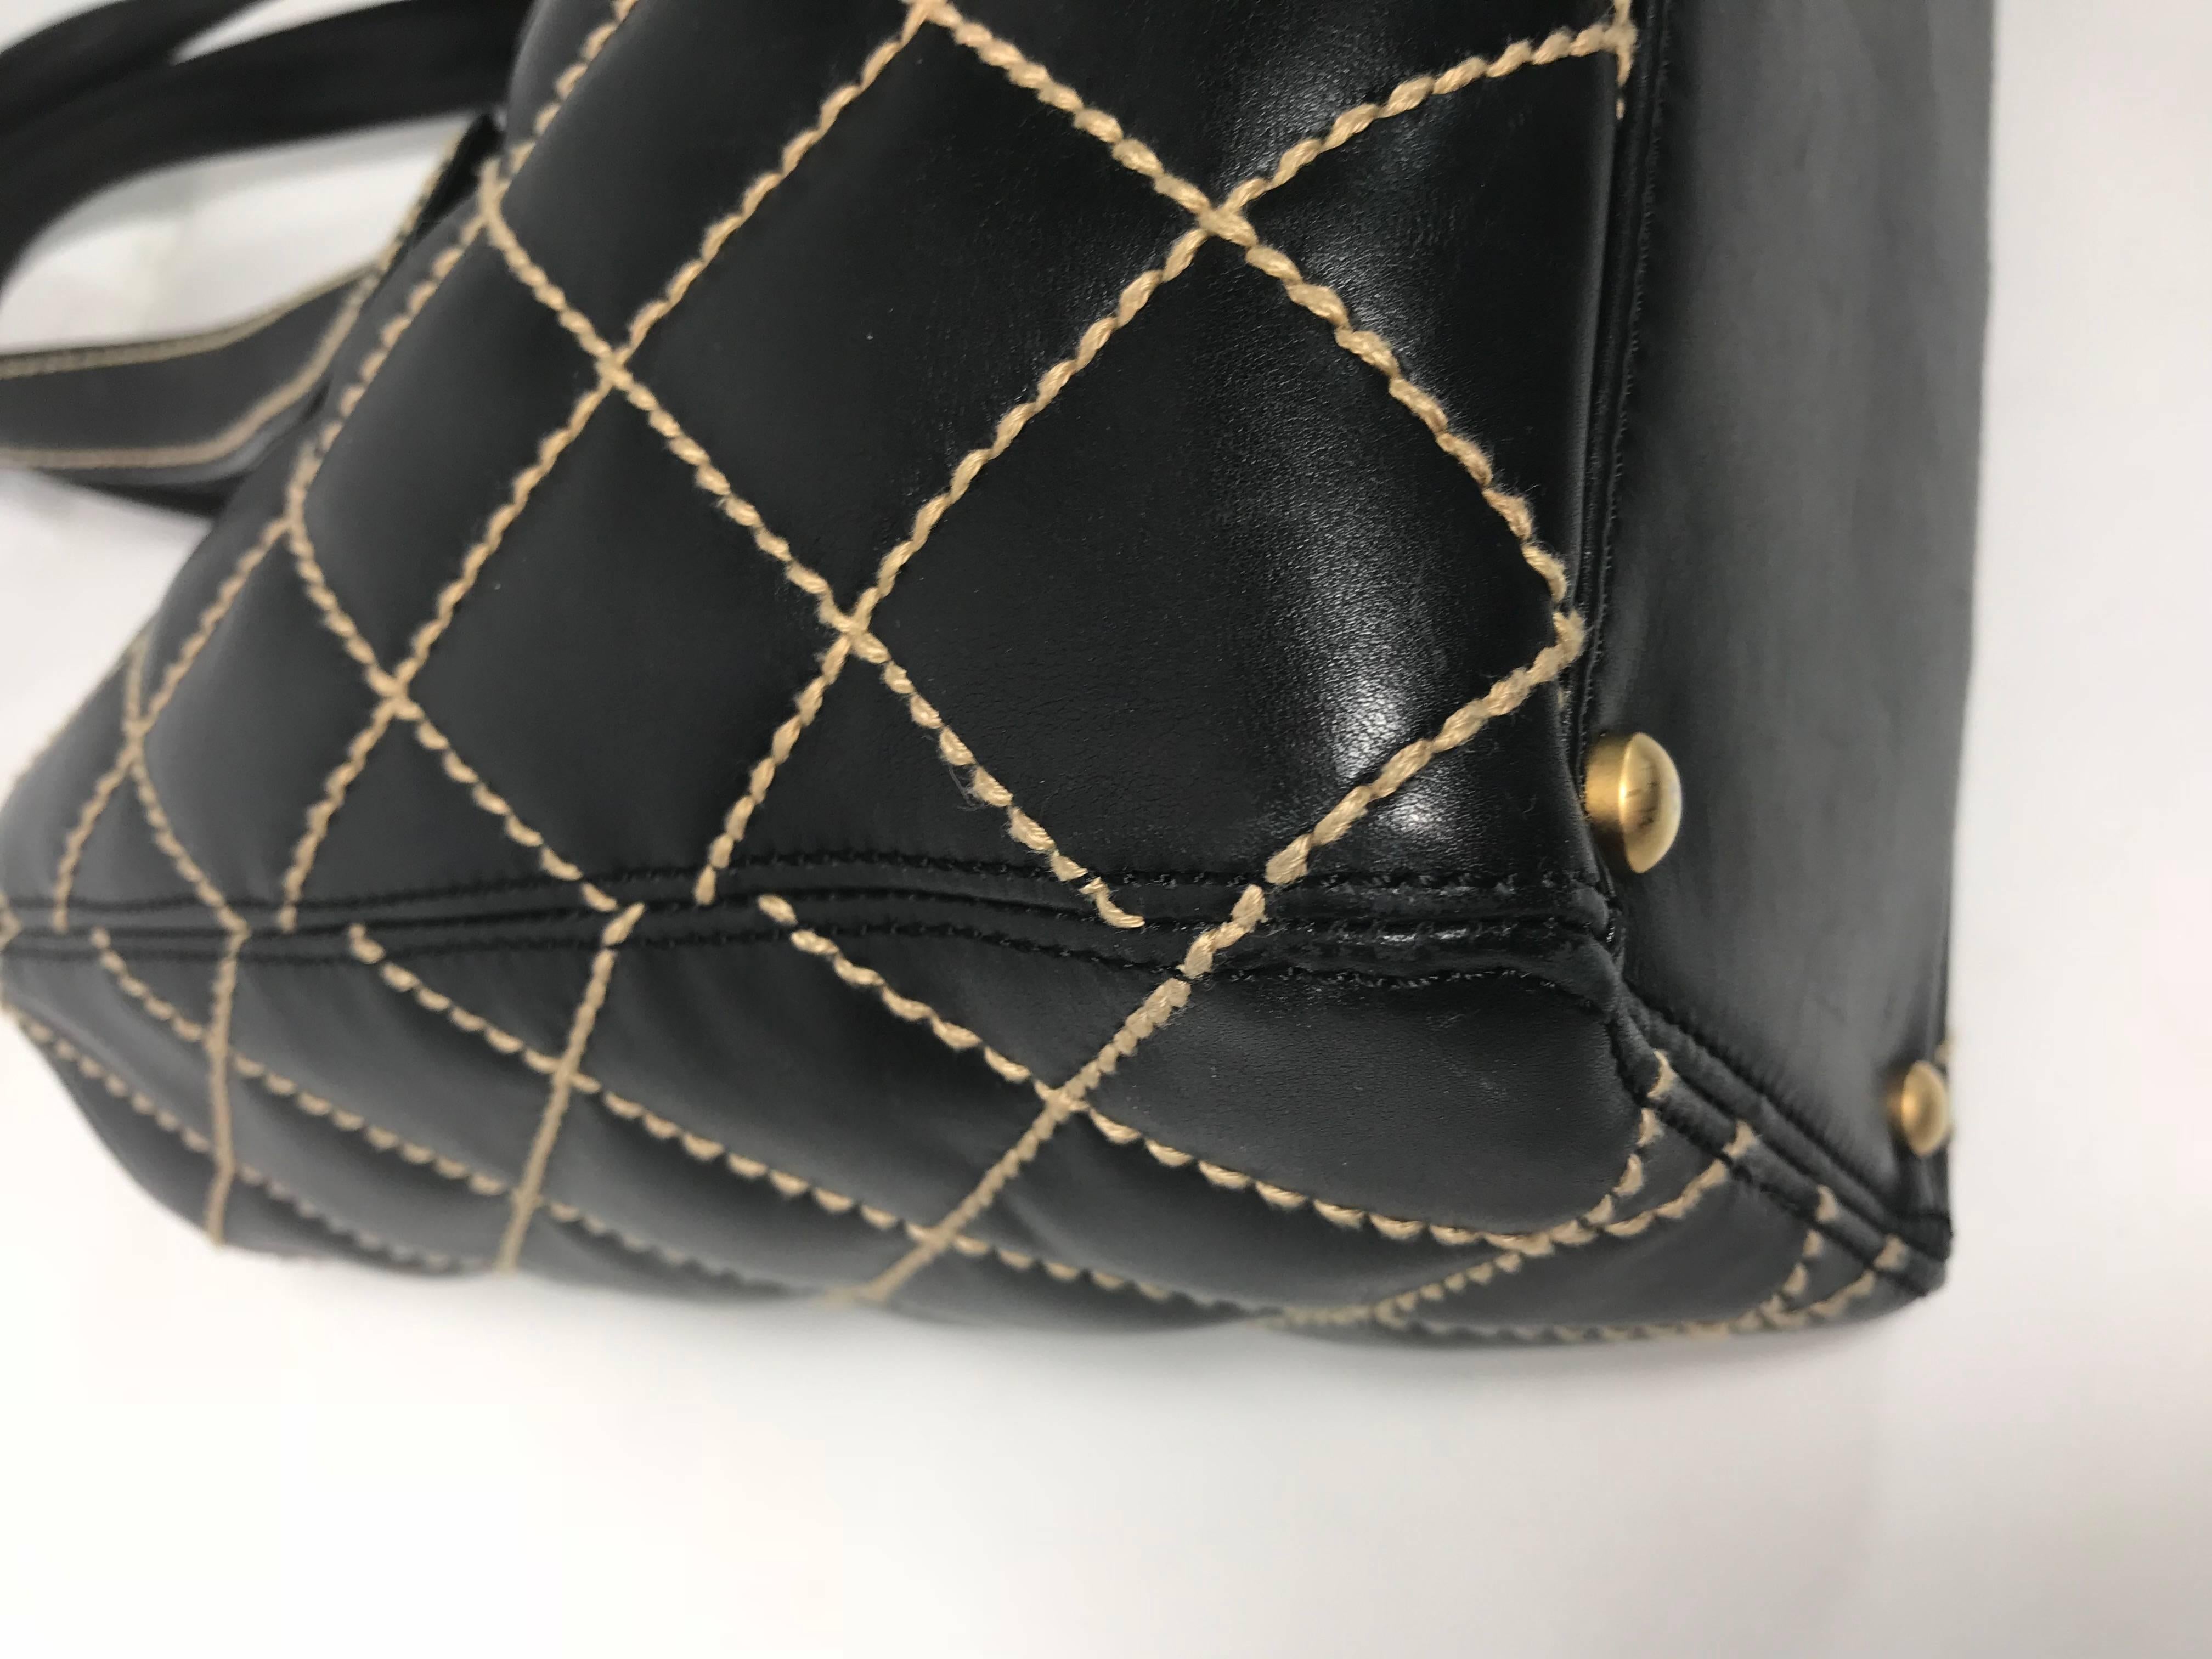 Chanel Quilted Leather Wild Stitch Tote in Black Tote Bag 2